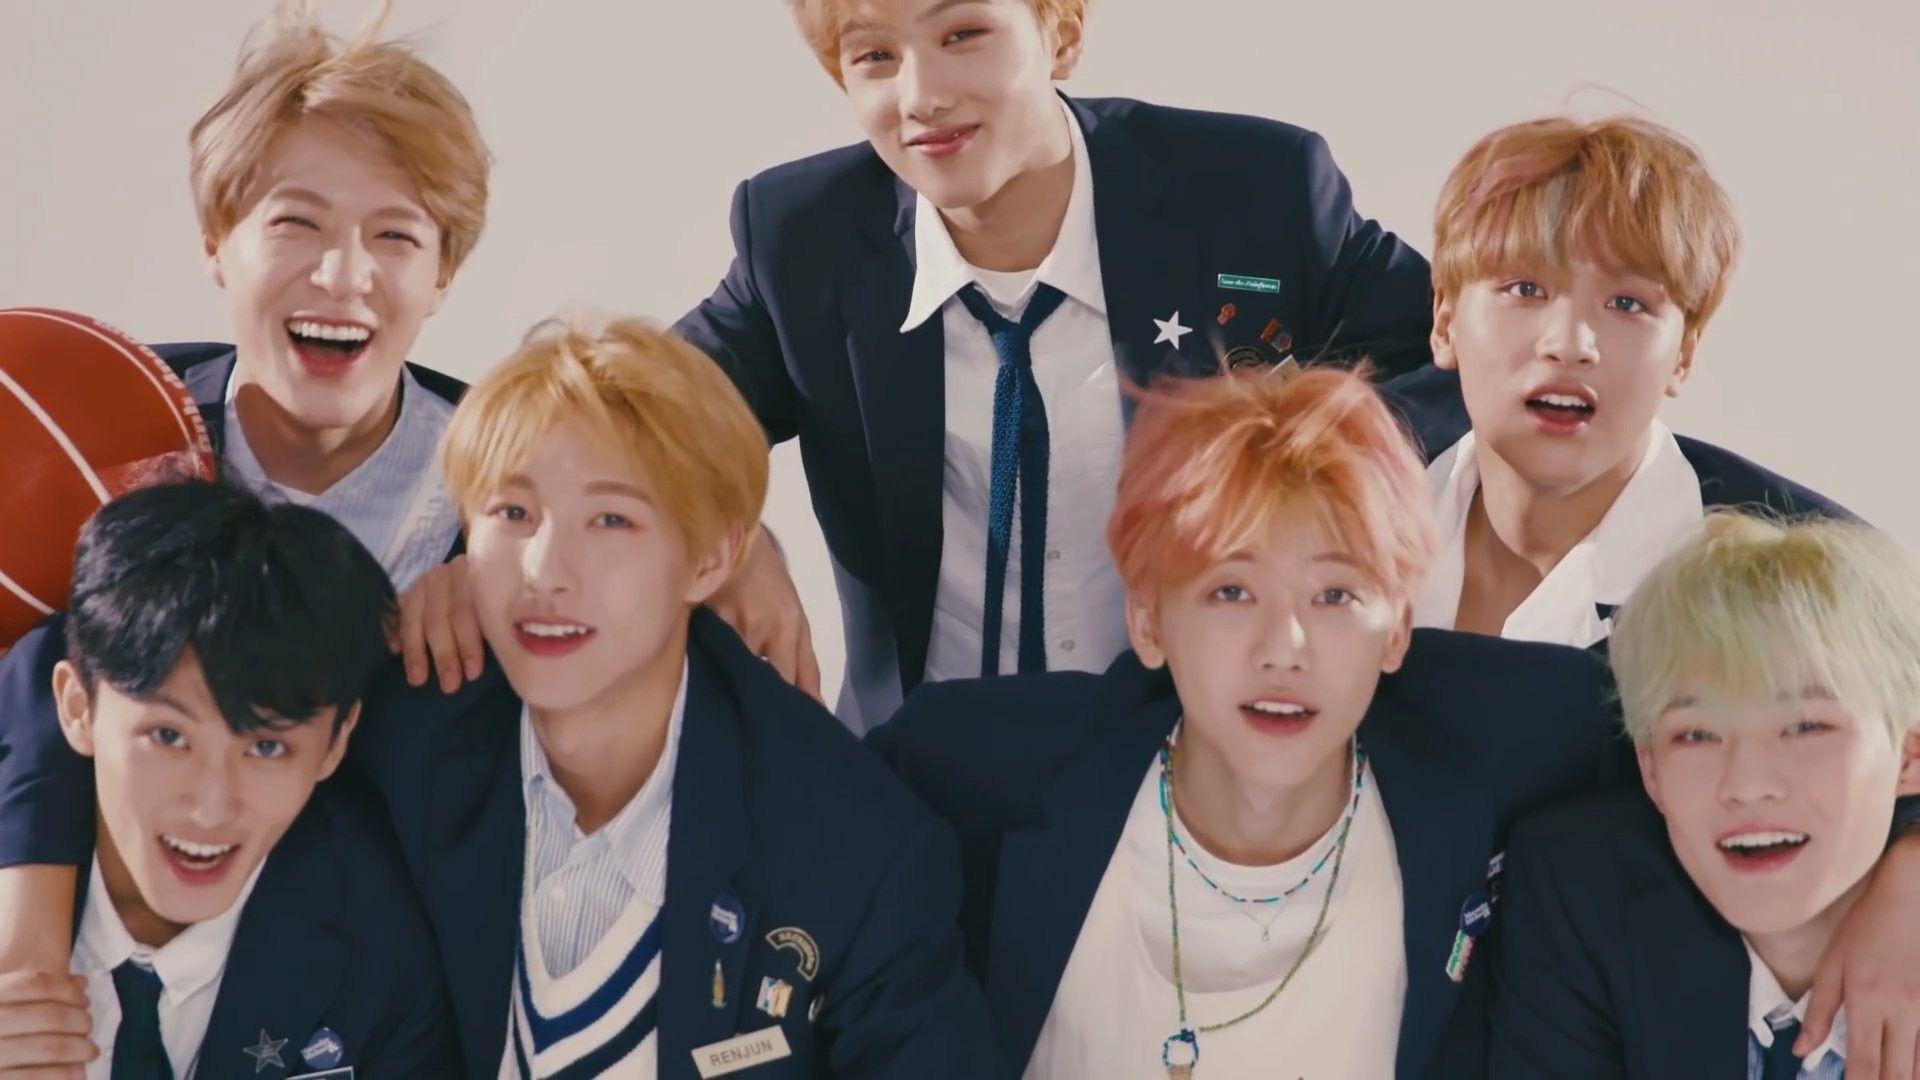 NCT Dream Laptop Wallpapers - Top Free NCT Dream Laptop Backgrounds